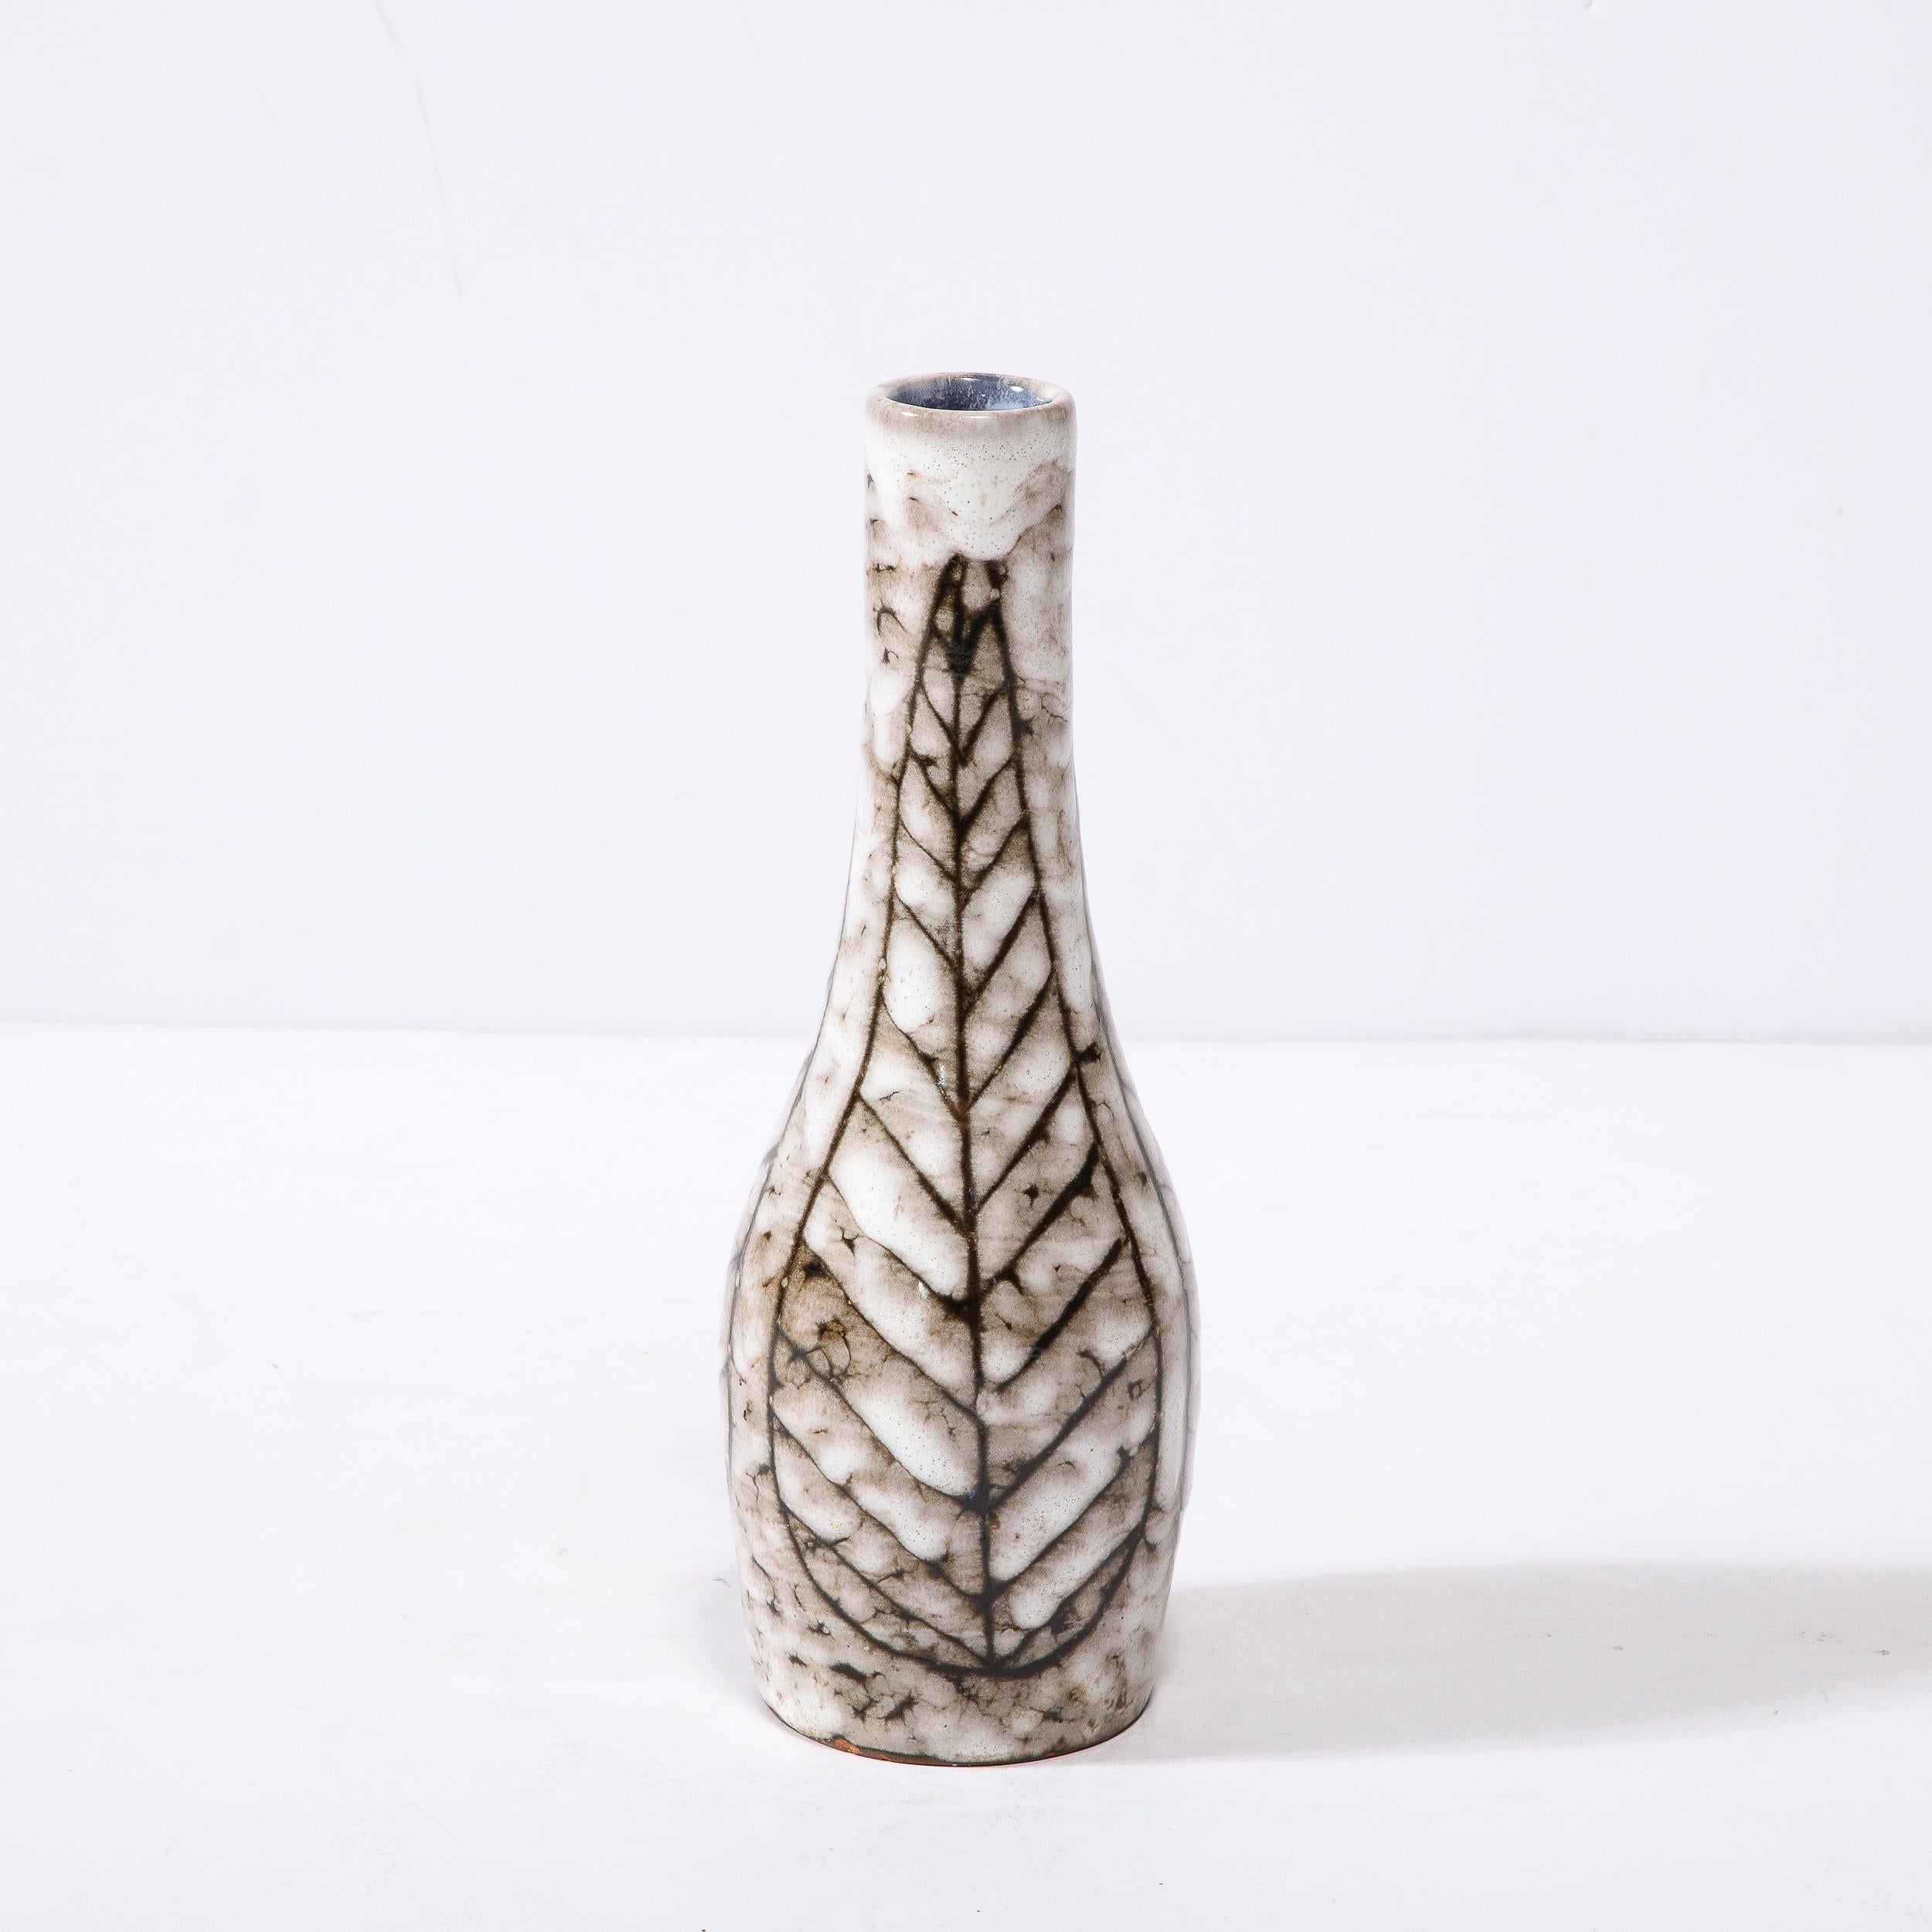 This Mid-Century Modernist Tapered Ceramic Vase with Linear Leaf Motif is a beautiful example of Post War European Ceramics, realized in Hódmezovasarhely Majolikagyár, Hungary circa 1960. With a Stunning textural finish composed in Cream White and